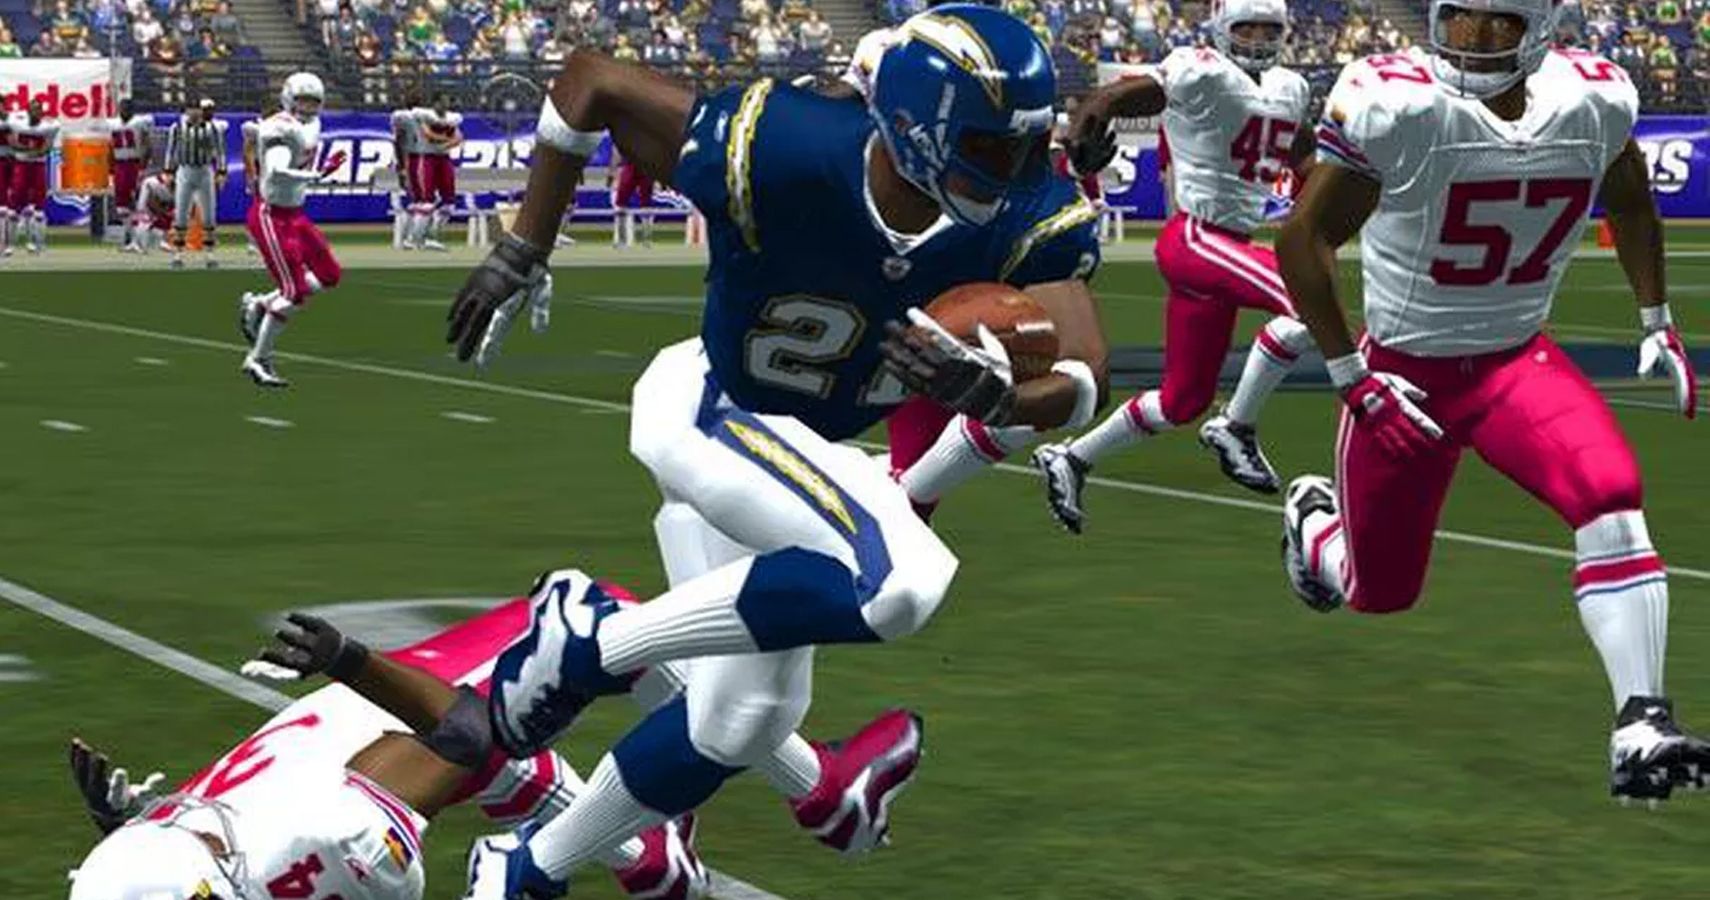 2K Will Be Making NFL Games For The First Time In Over 15 Years